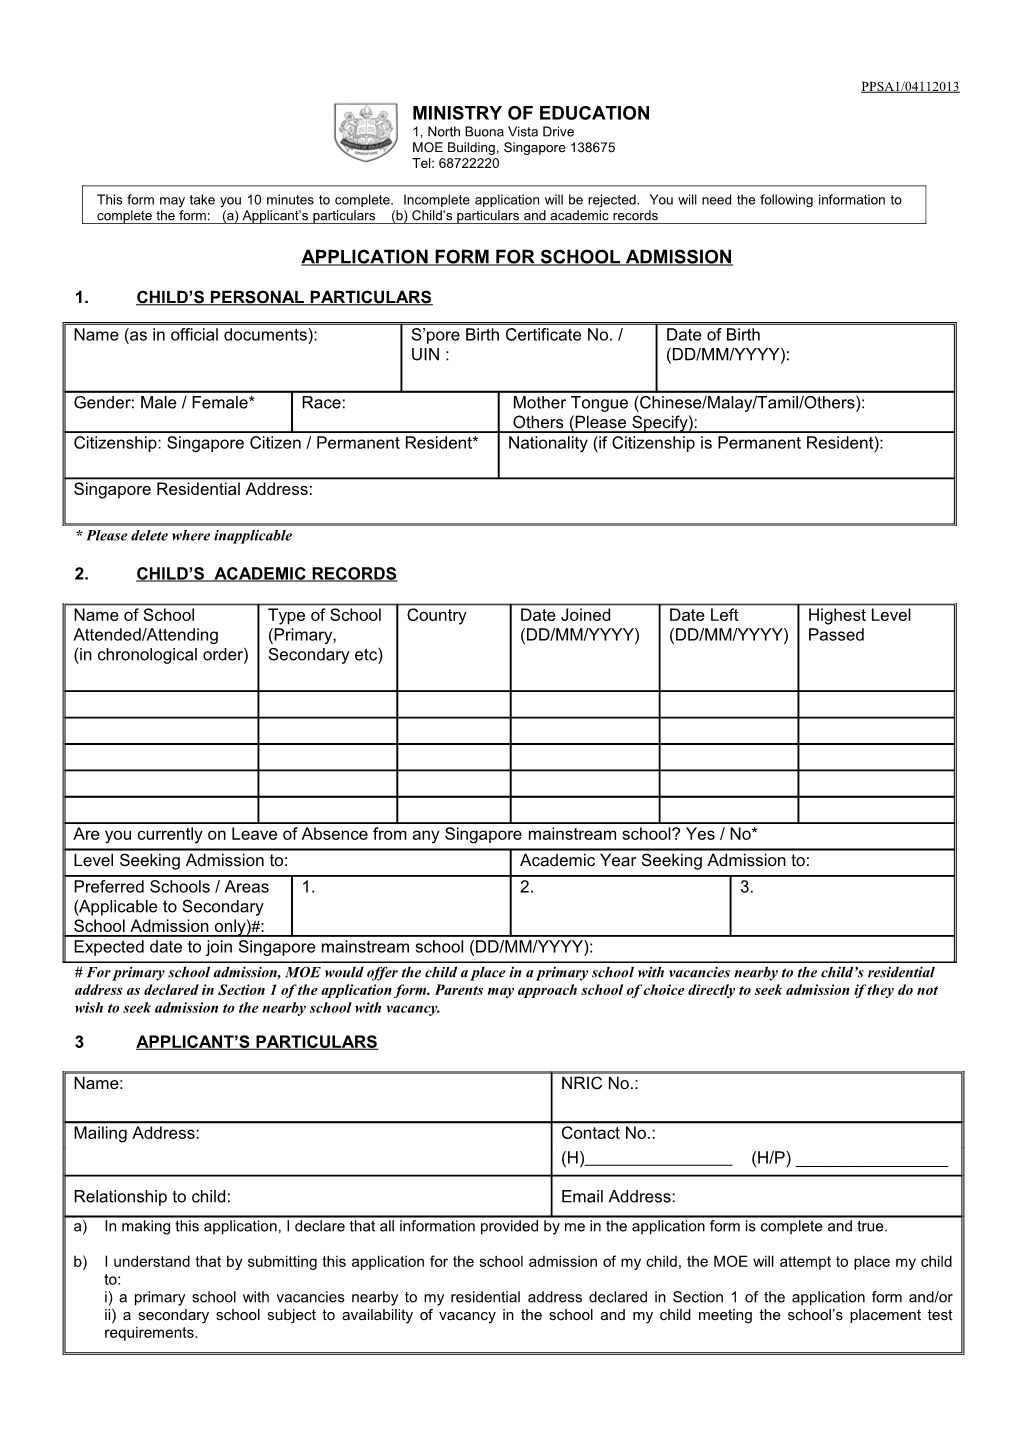 Application Form for School Admission